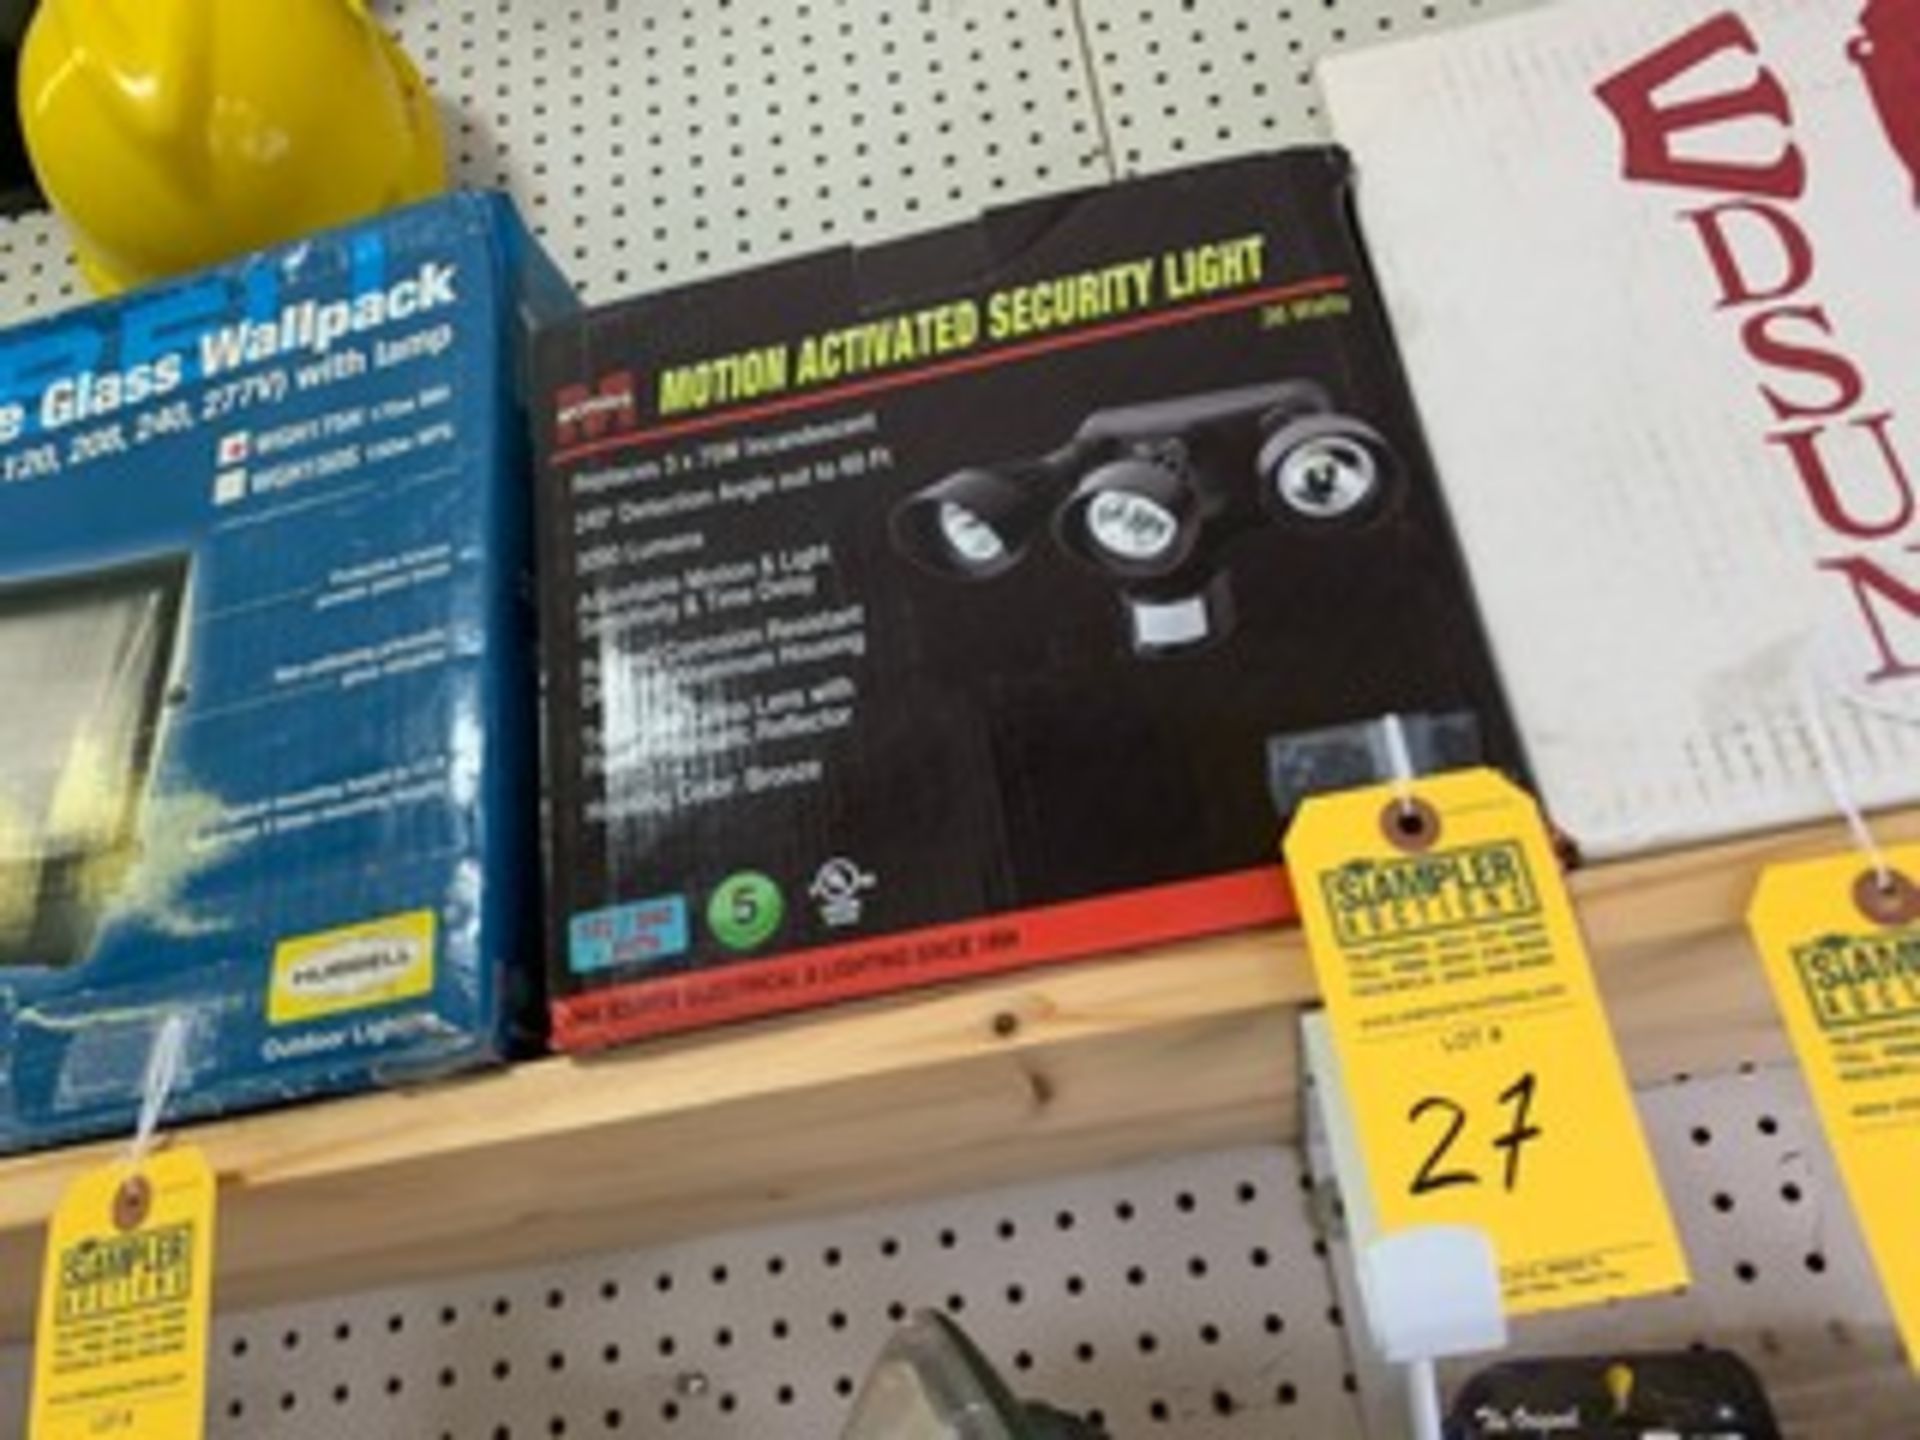 MORRIS MOTION ACTIVATED SECURITY LIGHT